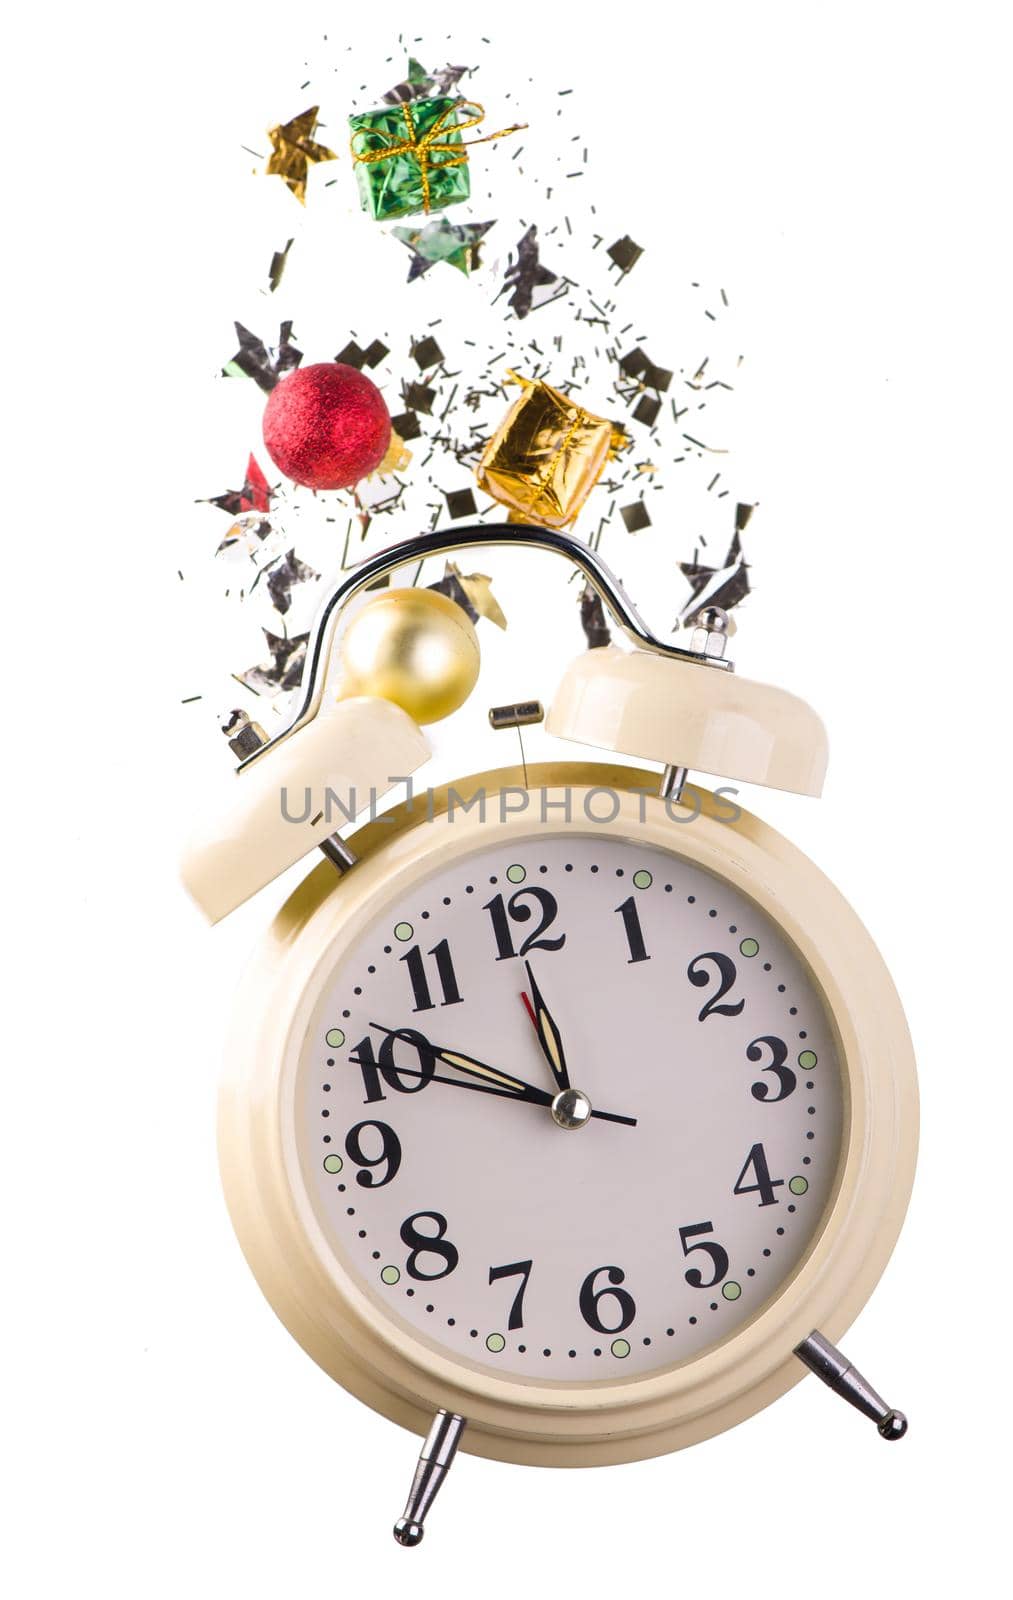 Christmas or New Year background with retro alarm clock and Christmas decorations - stars, confetti, balls and gift boxes, top view, flat lay by aprilphoto